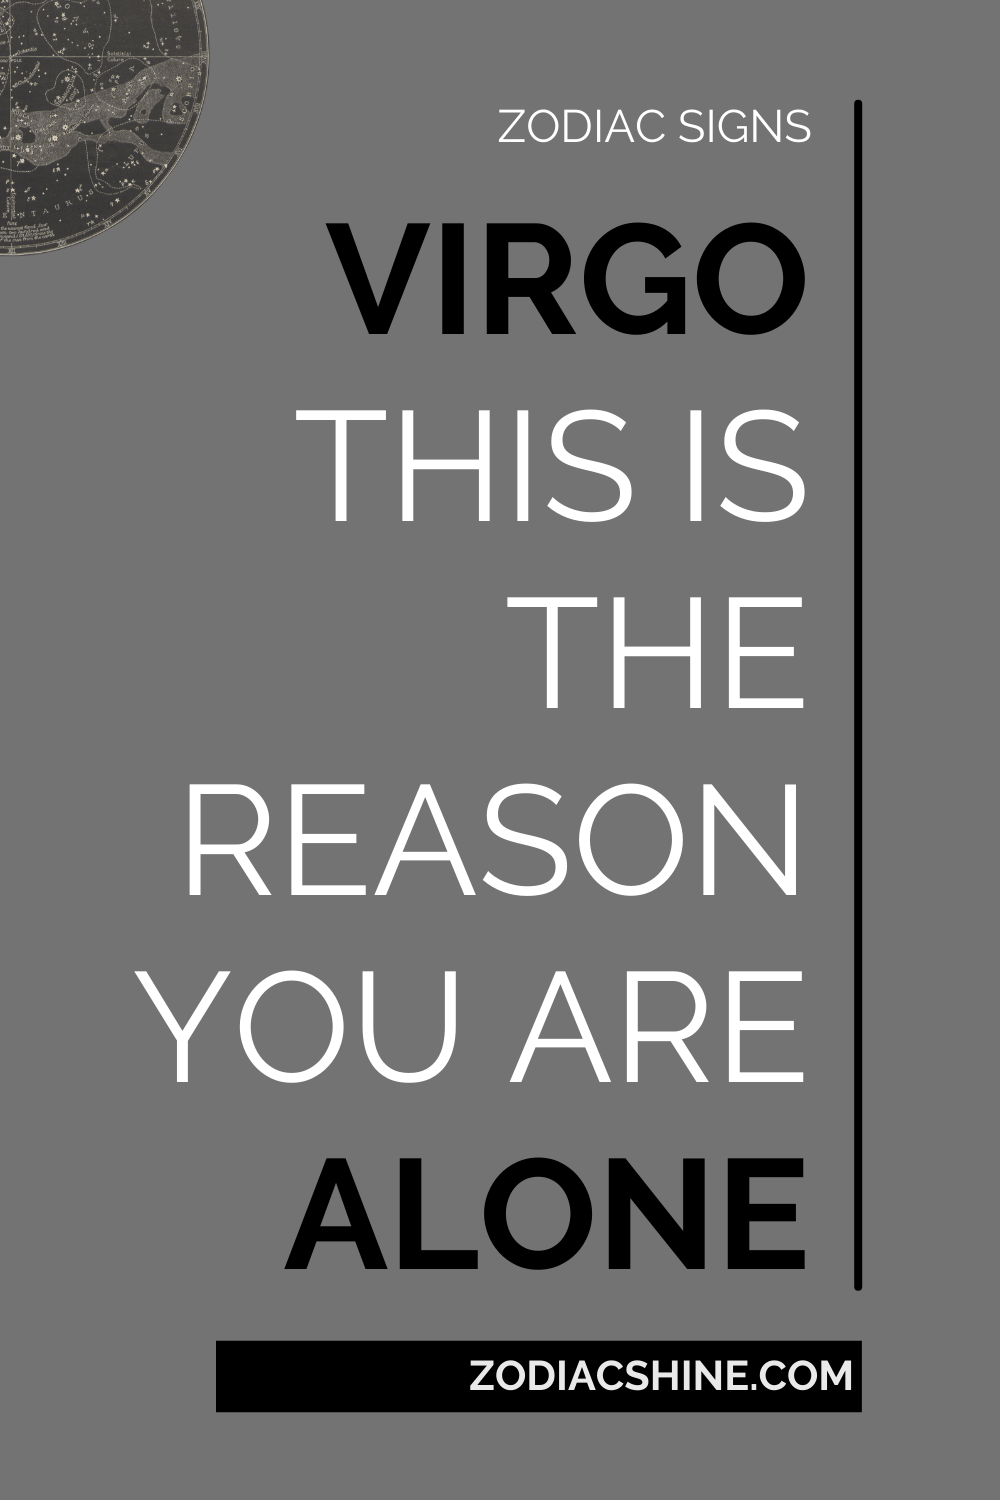 Virgo This Is The Reason You Are Alone